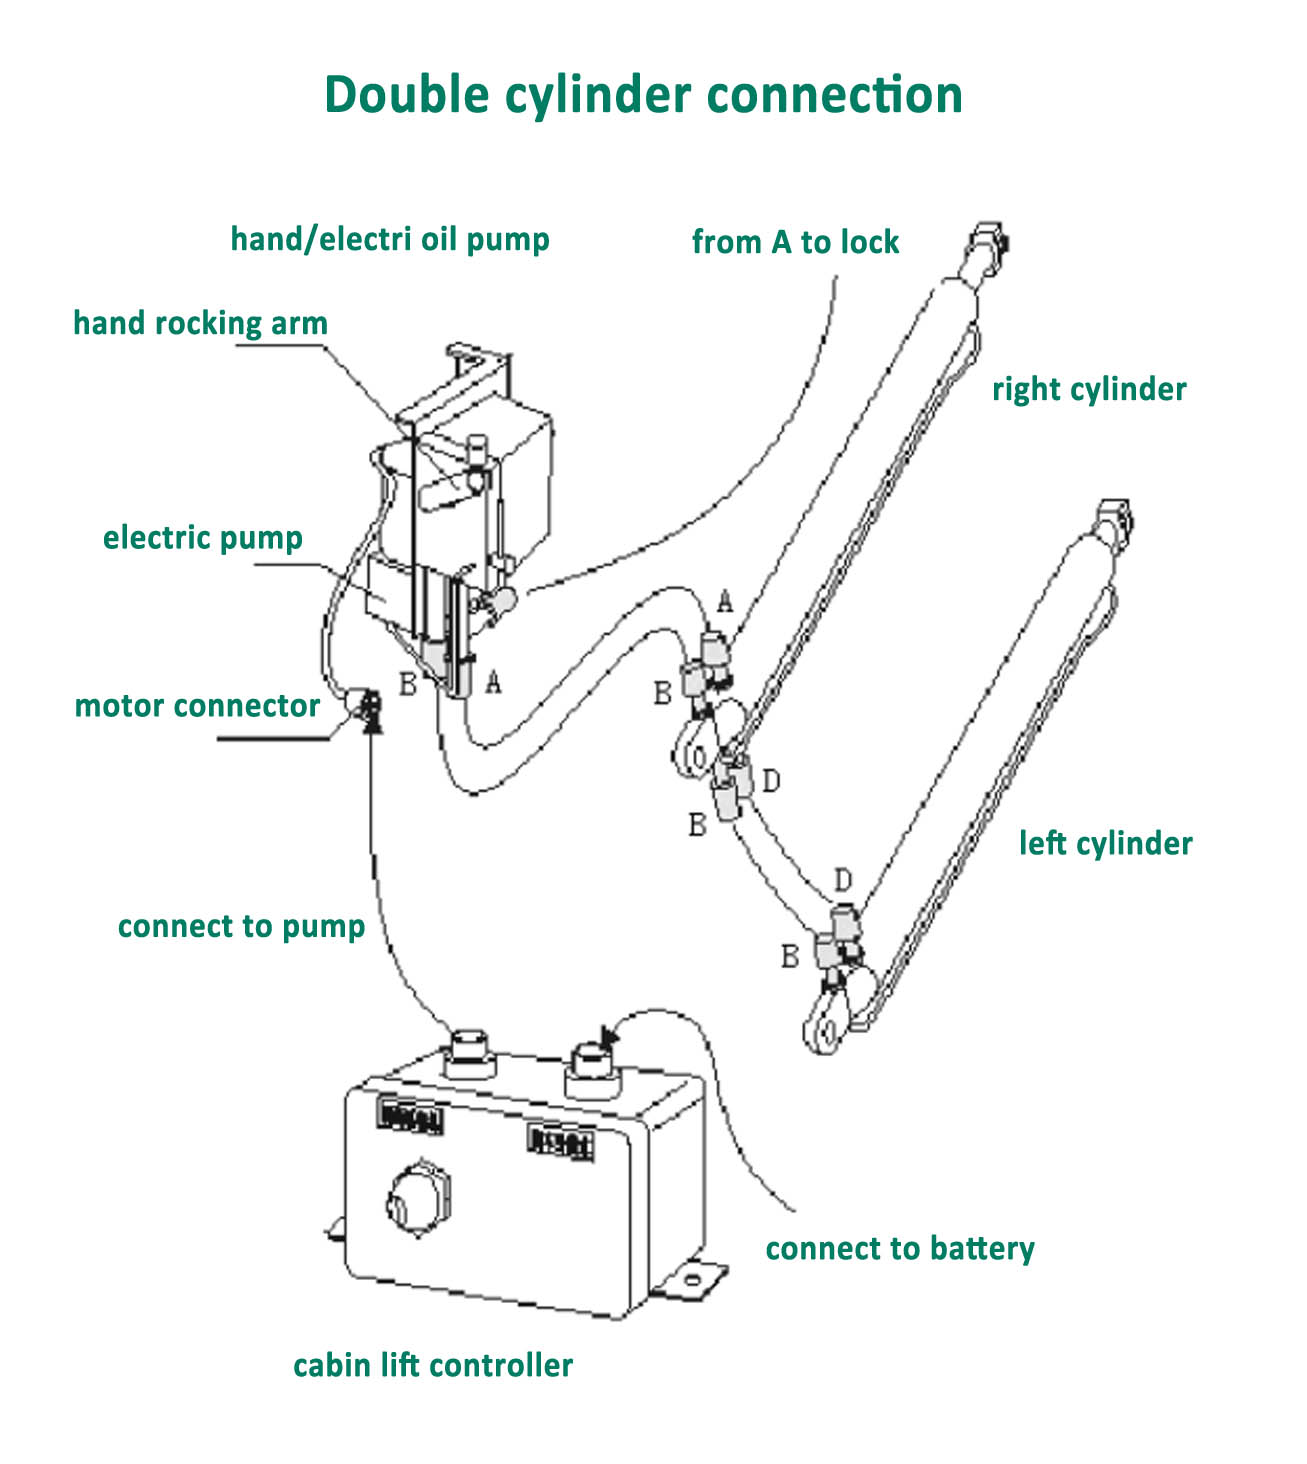 Double cylinder